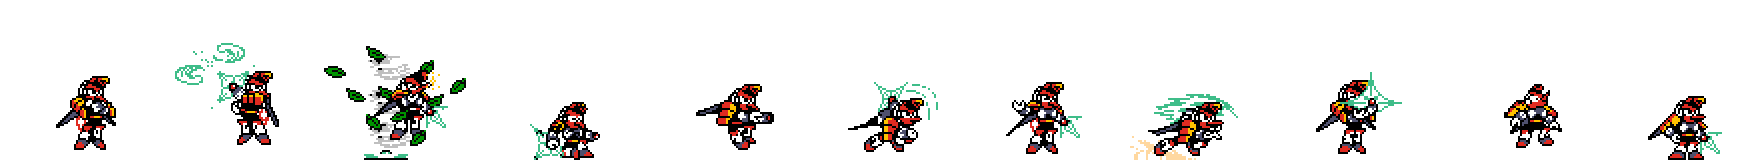 Tengu Man | Taunt Sprite Right<div style="margin-top: 4px; letting-spacing: 1px; font-size: 90%; font-family: Courier New; color: rgb(159, 150, 172);">[robot:right:taunt]{tengu-man}</div>